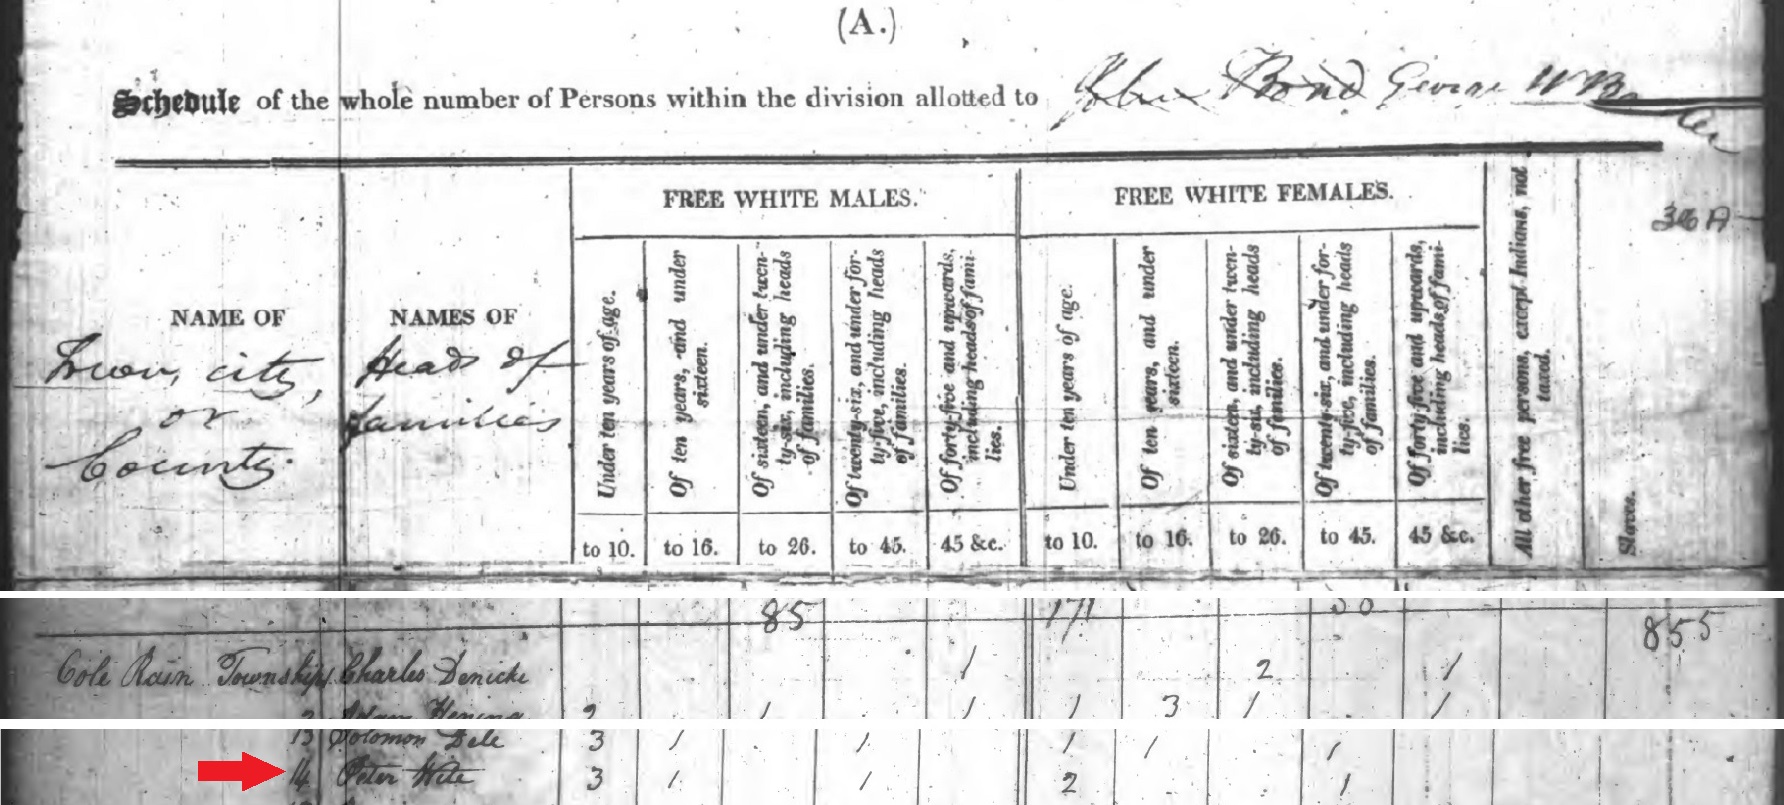 Peter White in the 1810 census of Colerain Township, Bedford County, Pennsylvania.